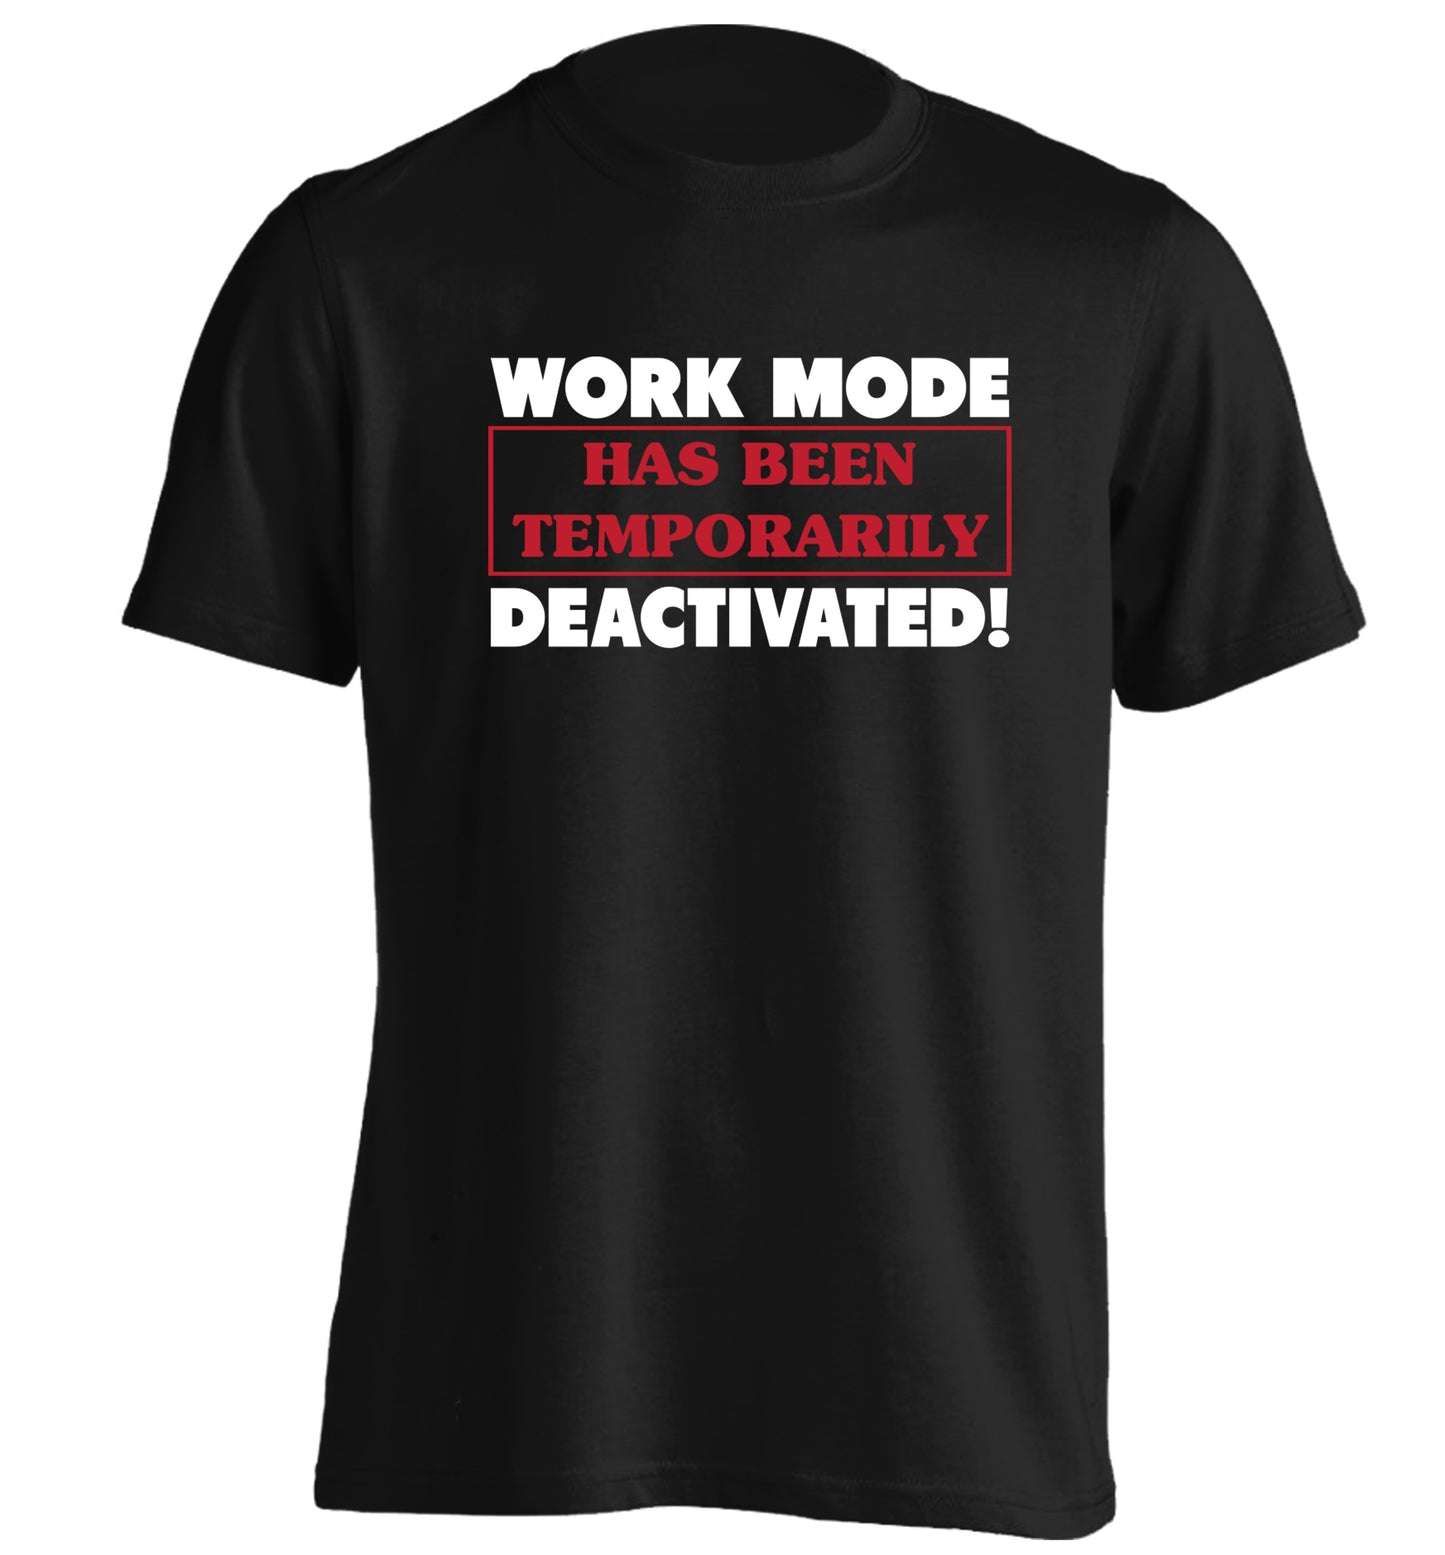 Work mode has now been temporarily deactivated adults unisex black Tshirt 2XL